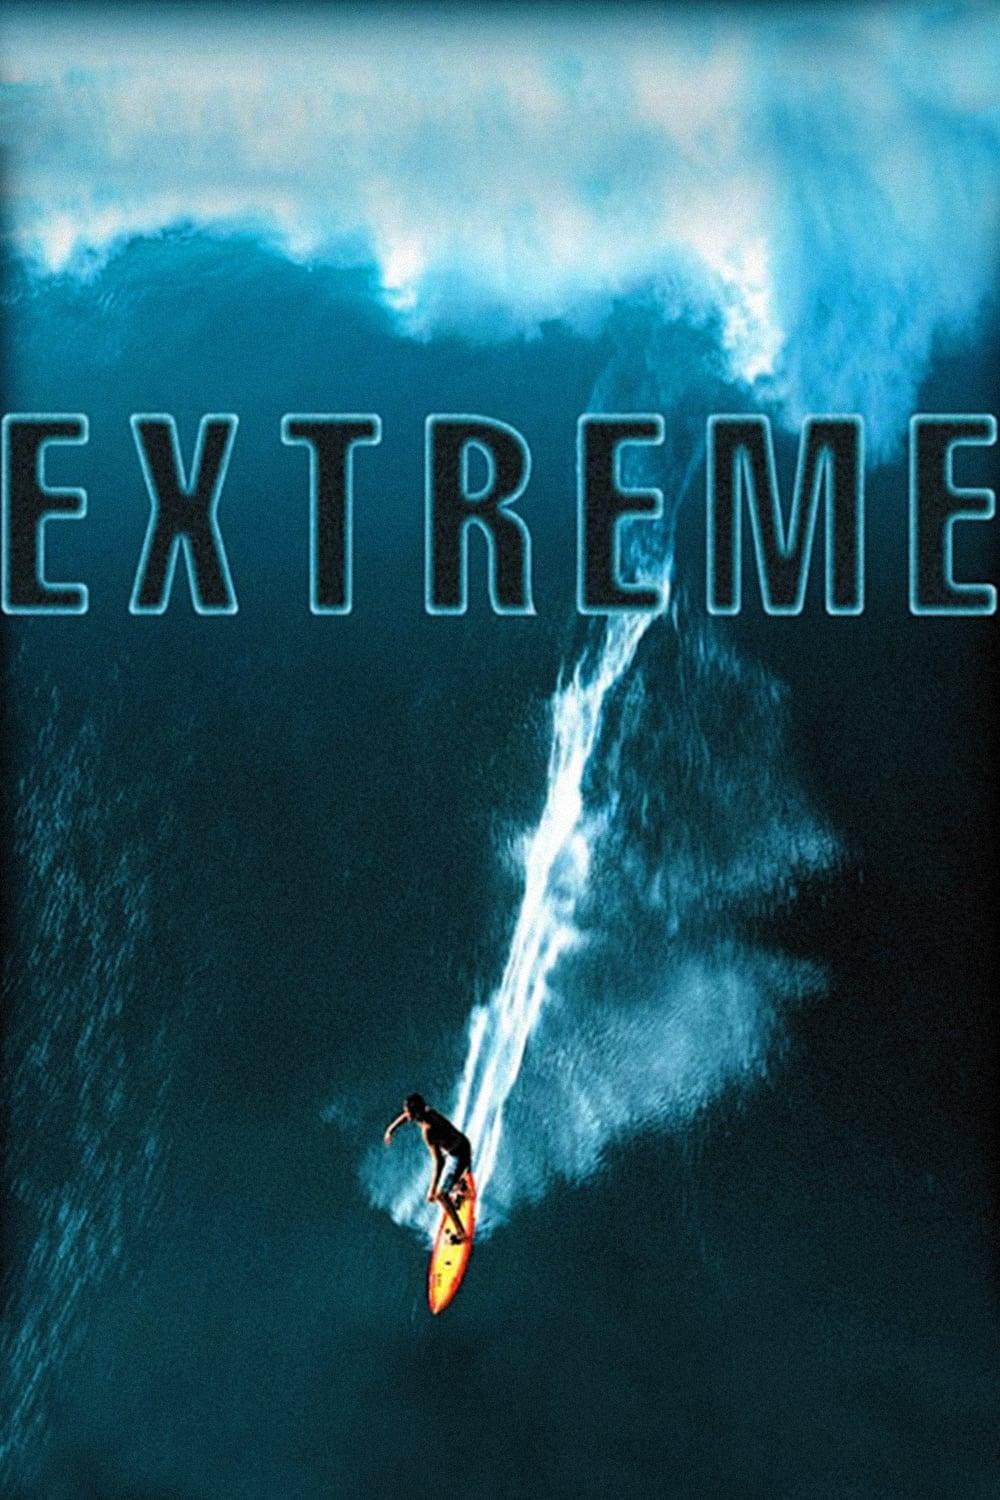 Extreme poster